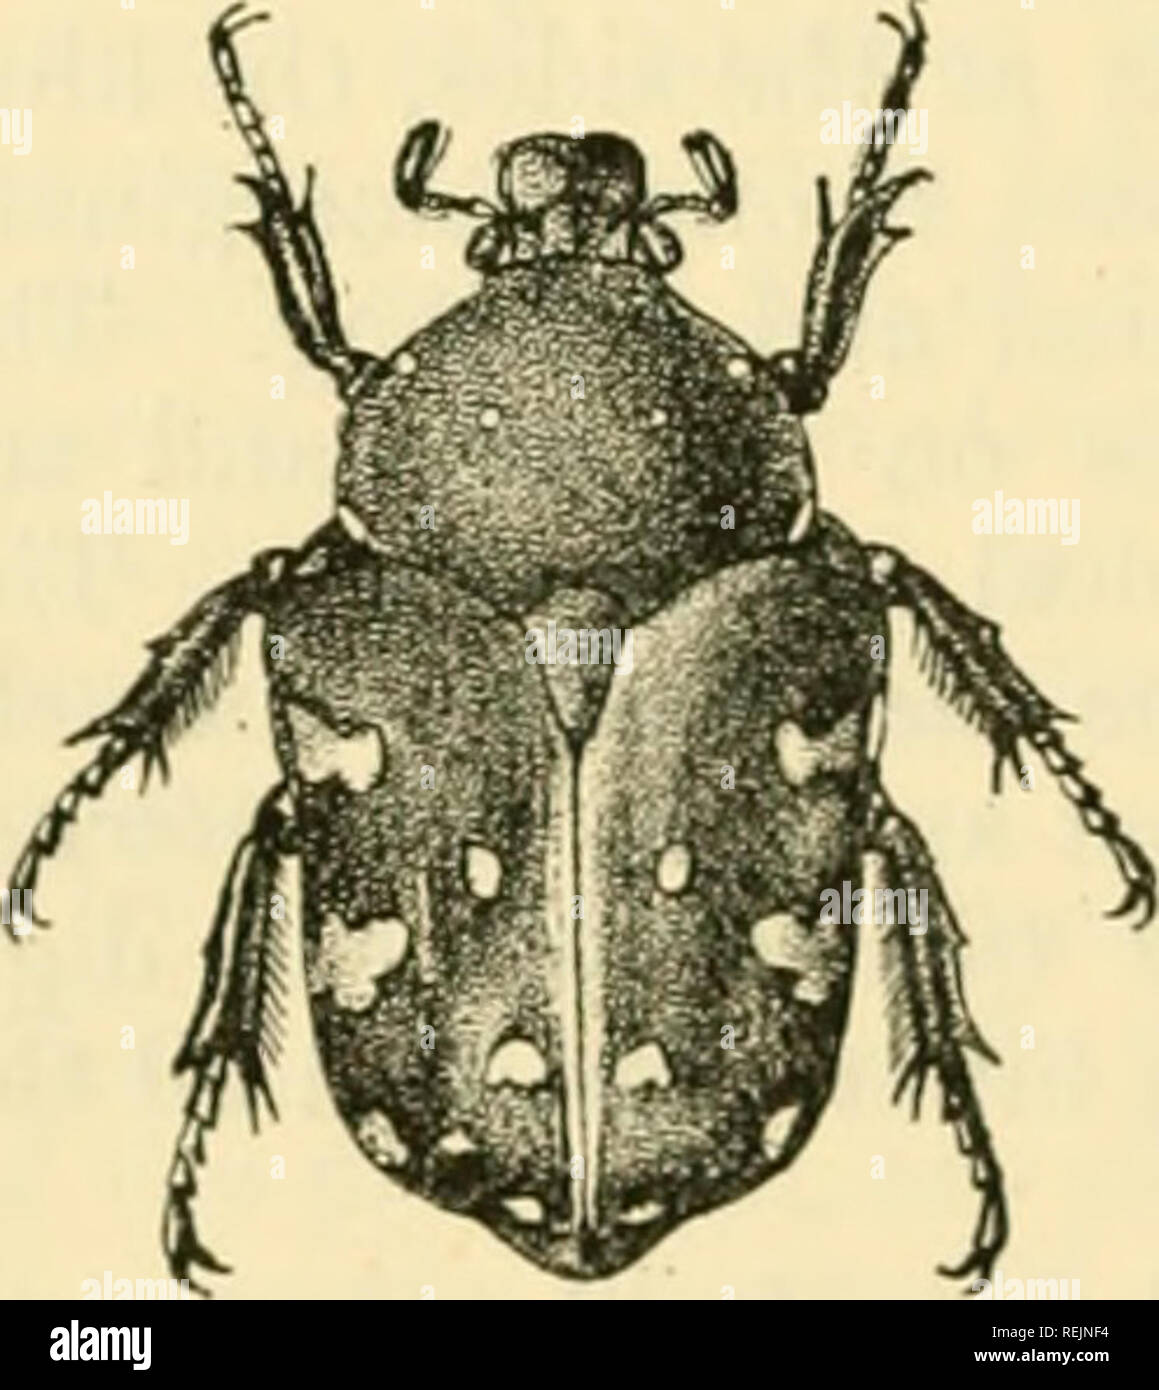 . Coleoptera: Lamellicornia. Scarabaeidae. 152 CETONim^. 131. ProtsBtia regalis. Protsetia regalis, Blanch., Liste Cet. Mus. Paris, 1842, p. 1; Bunn., Havdb. Ent. iii. 1842, p. 490. Cetonia withilli, Bainbr.,* Trans. Ent. Soc. Land. 1842, p. 218. Progastor regalis, Thorns., Le Nat. 1880, p. 278. Protsetia regalis, var. horni, Kraatz, Deutsche Ent. Zeitschr. 1900, p. 144. Coppery or almost black, with the legs and lower surface shining and the upper surface and pj-gidium opaque; decorated with pale yellow spots placed as follows:—a pair placed transversely near the middle of the pronotum, one n Stock Photo